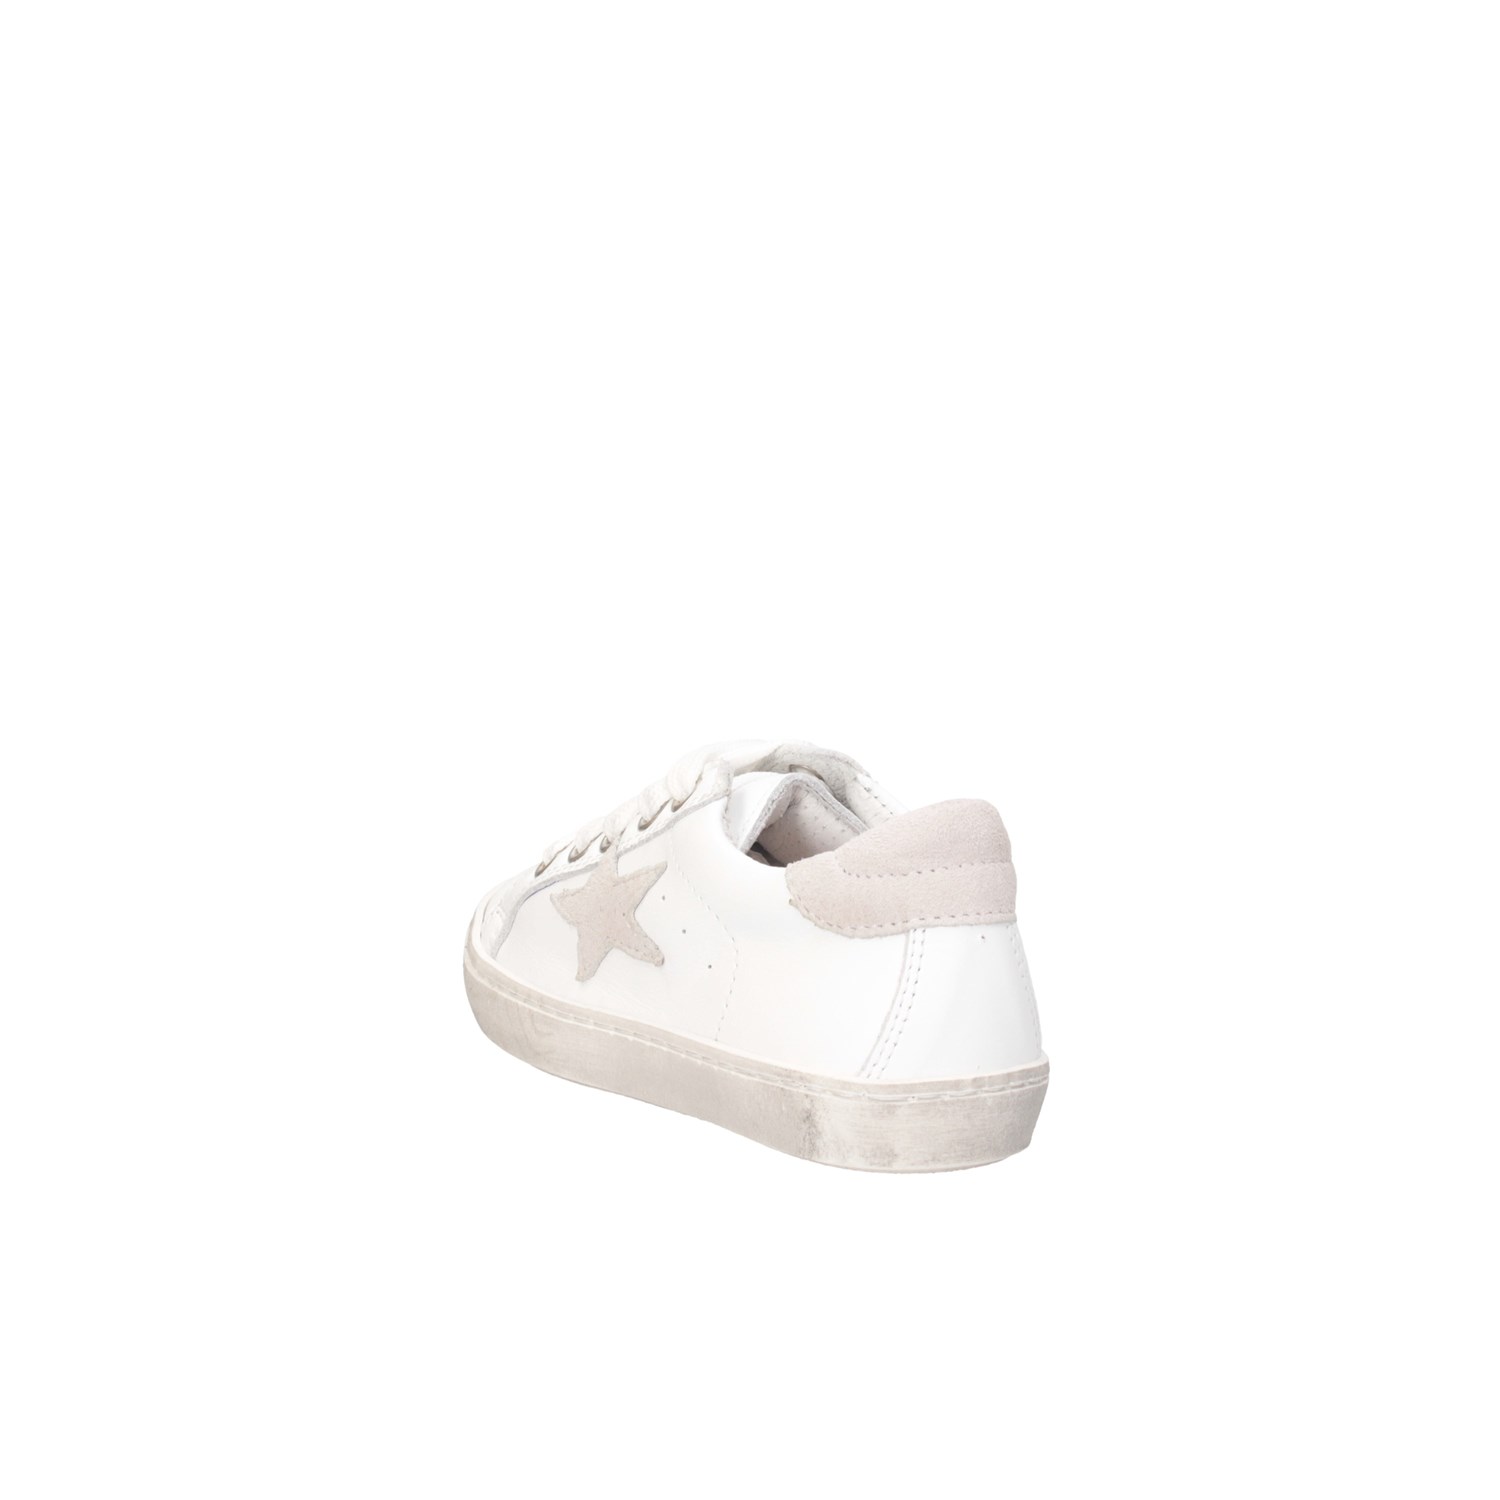 Dianetti Made In Italy I9869 White / Gray Shoes Child 